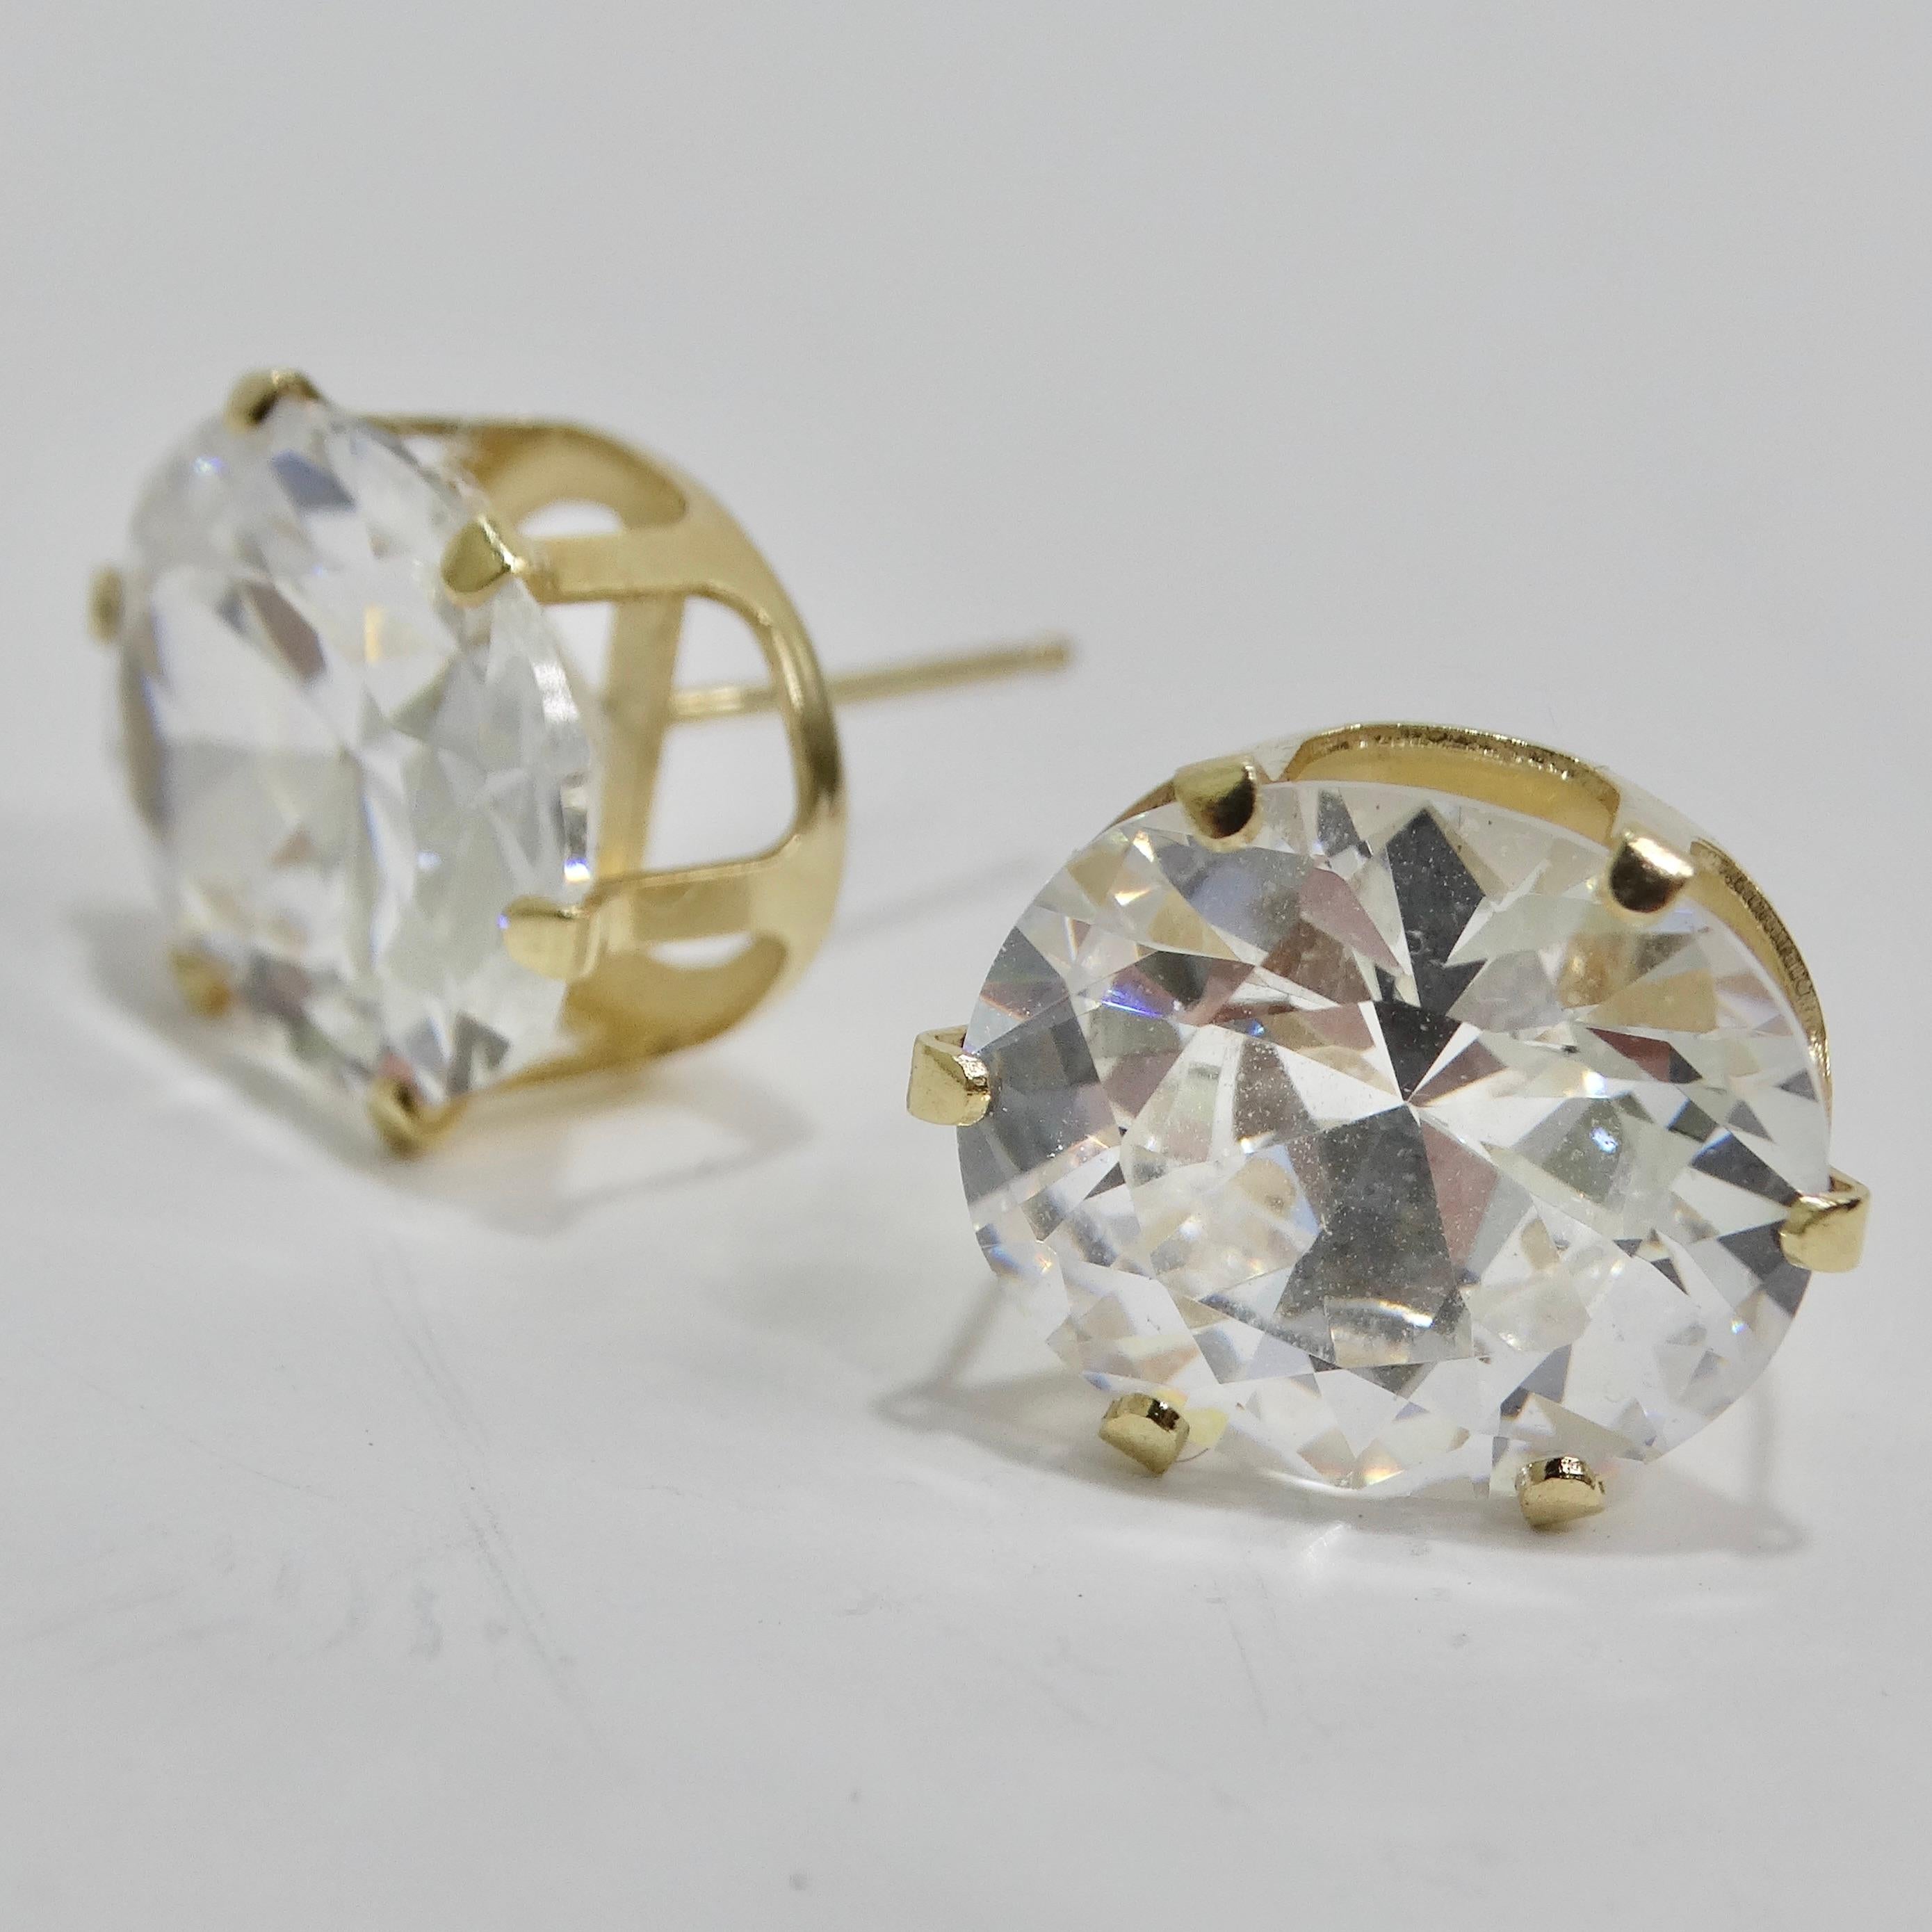 Introducing the exquisite 18K Gold Plated Swarovski Synthetic Round Emerald Cut Crystal Stud Earrings, a timeless and elegant addition to your jewelry collection. Approximately 4 carats each! Crafted with precision and adorned with Swarovski